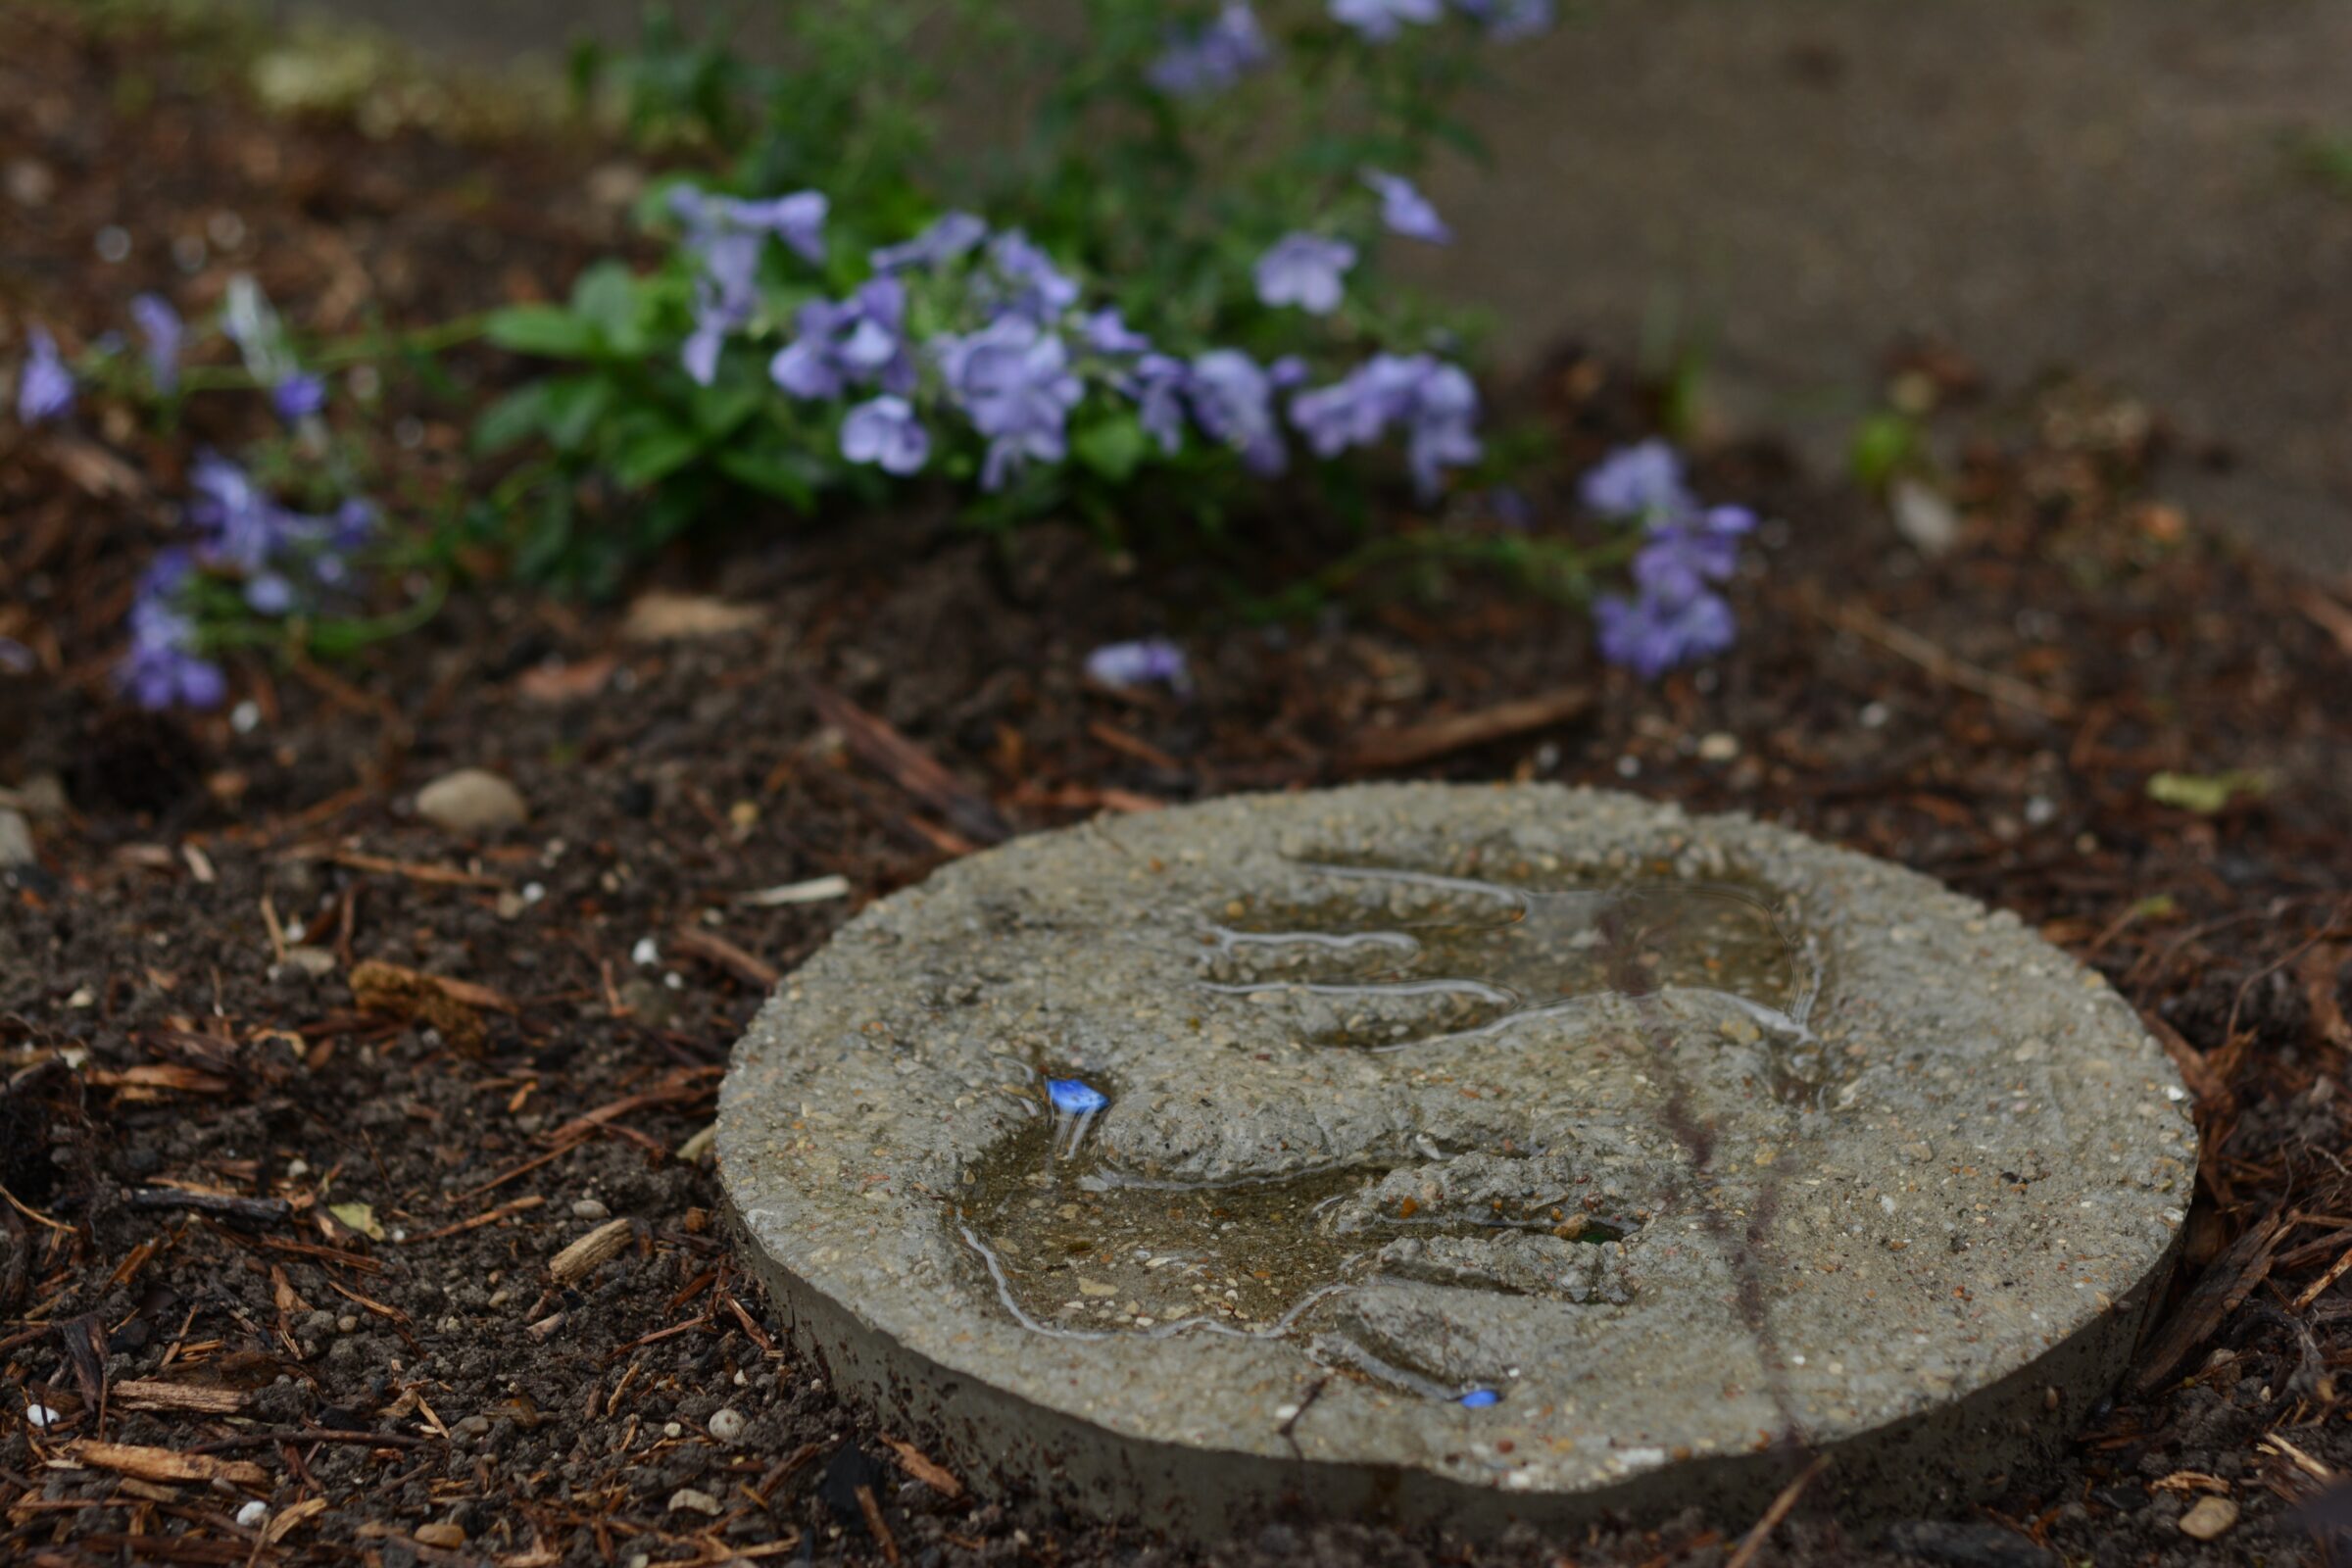 Child handprints in a concrete stepping stone.